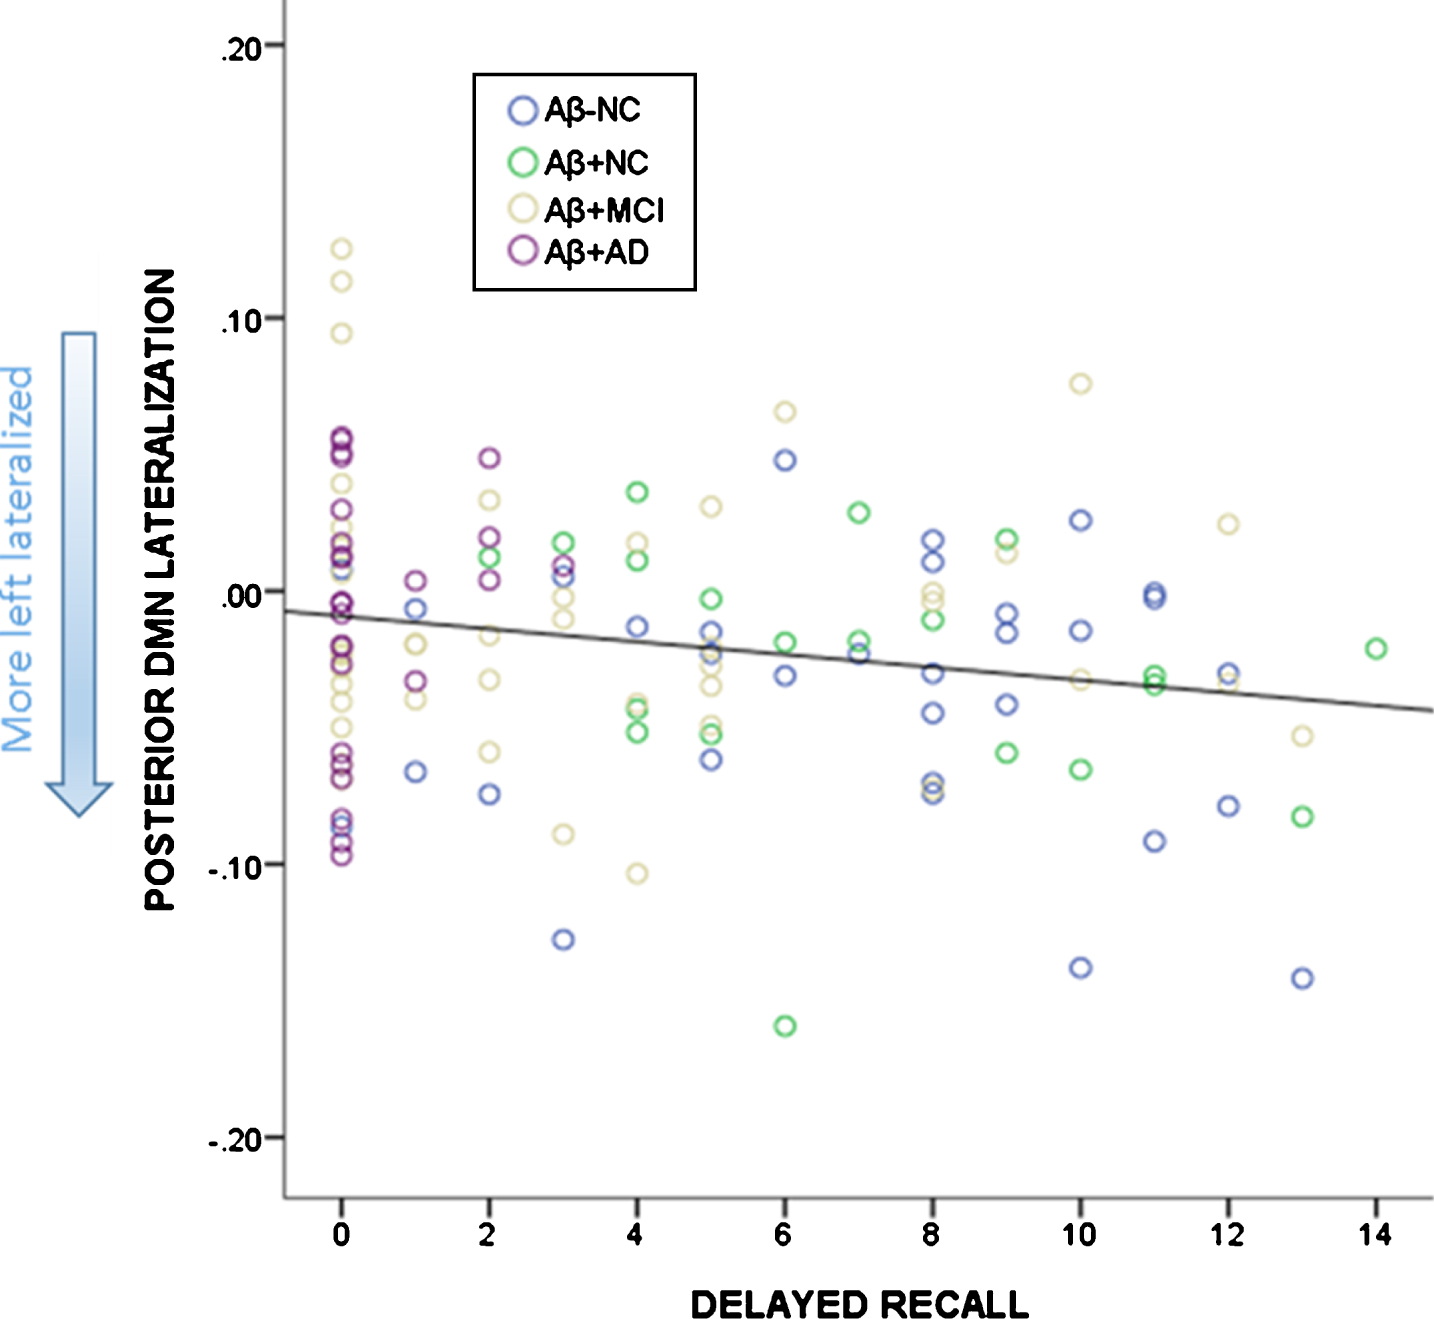 Relationship between delayed recall (number of words) on the RAVLT and lateralization of the pDMN. More left lateralized is depicted by more negative scores.